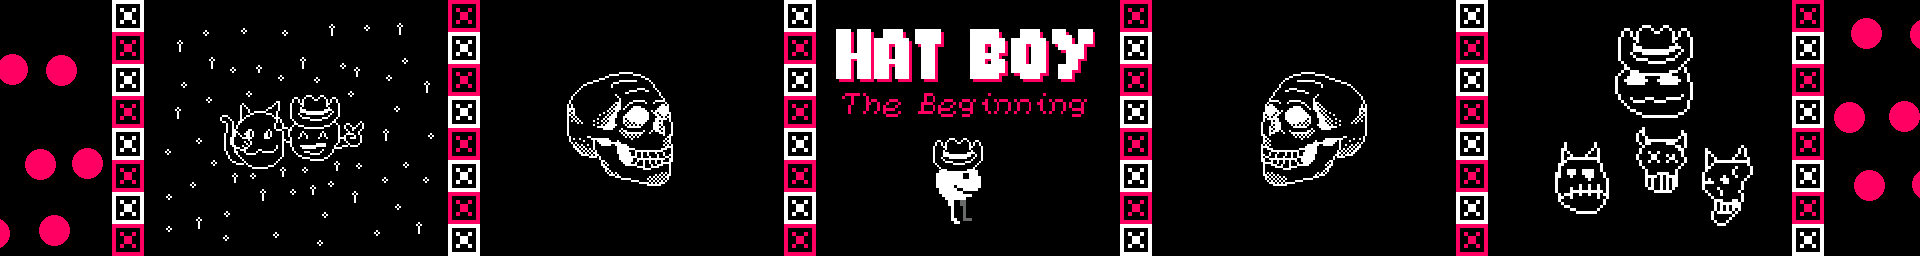 /static/projects/video_games/hat_boy/banner.webp